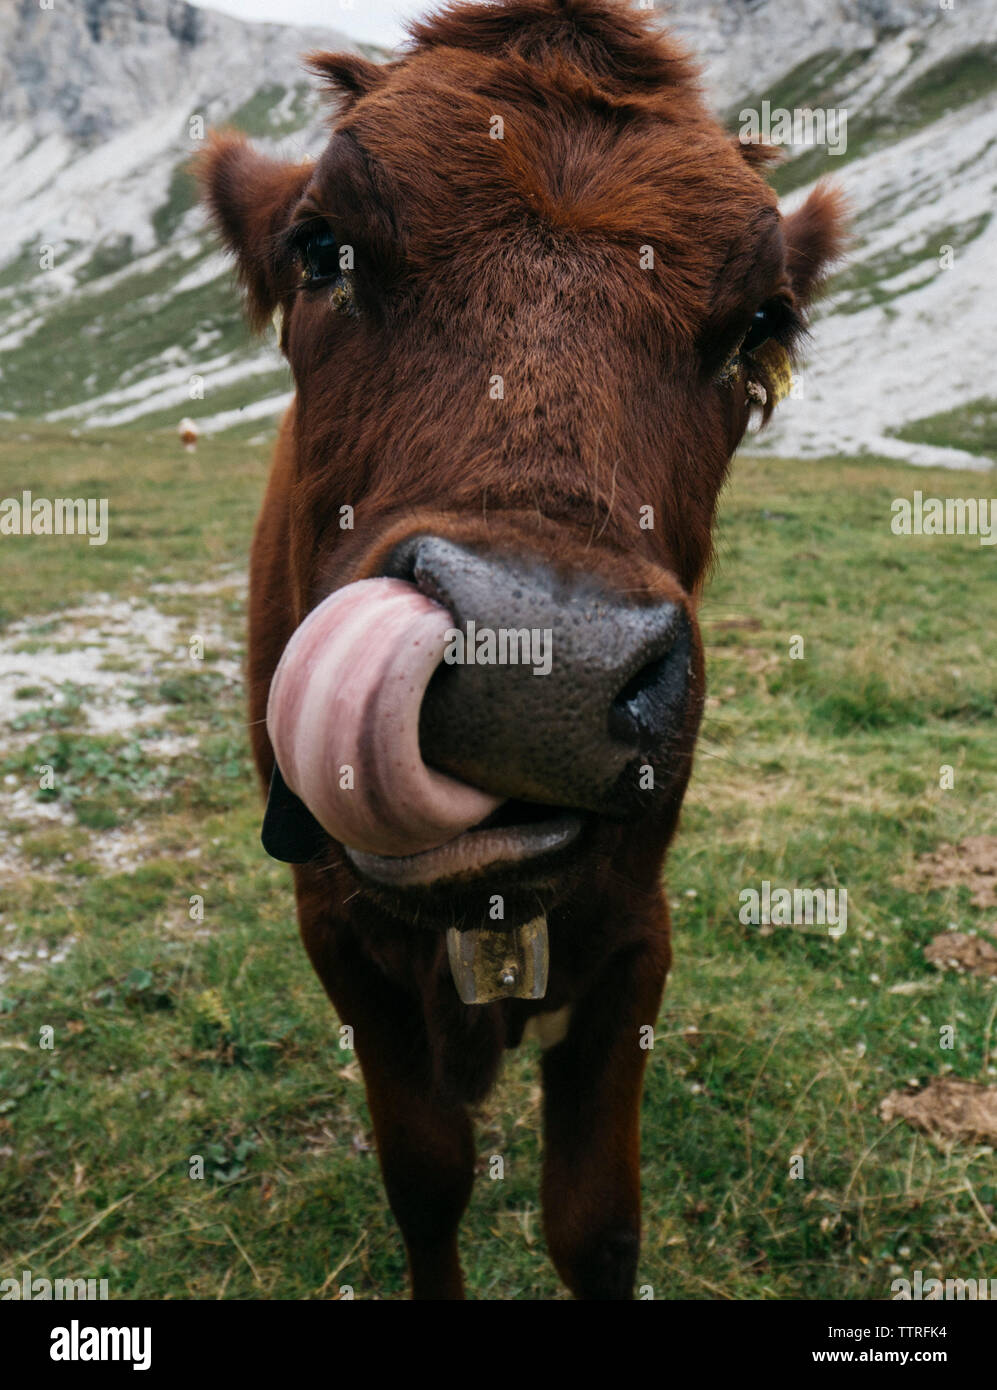 Portrait of cow sticking out tongue while standing on grassy field Stock Photo